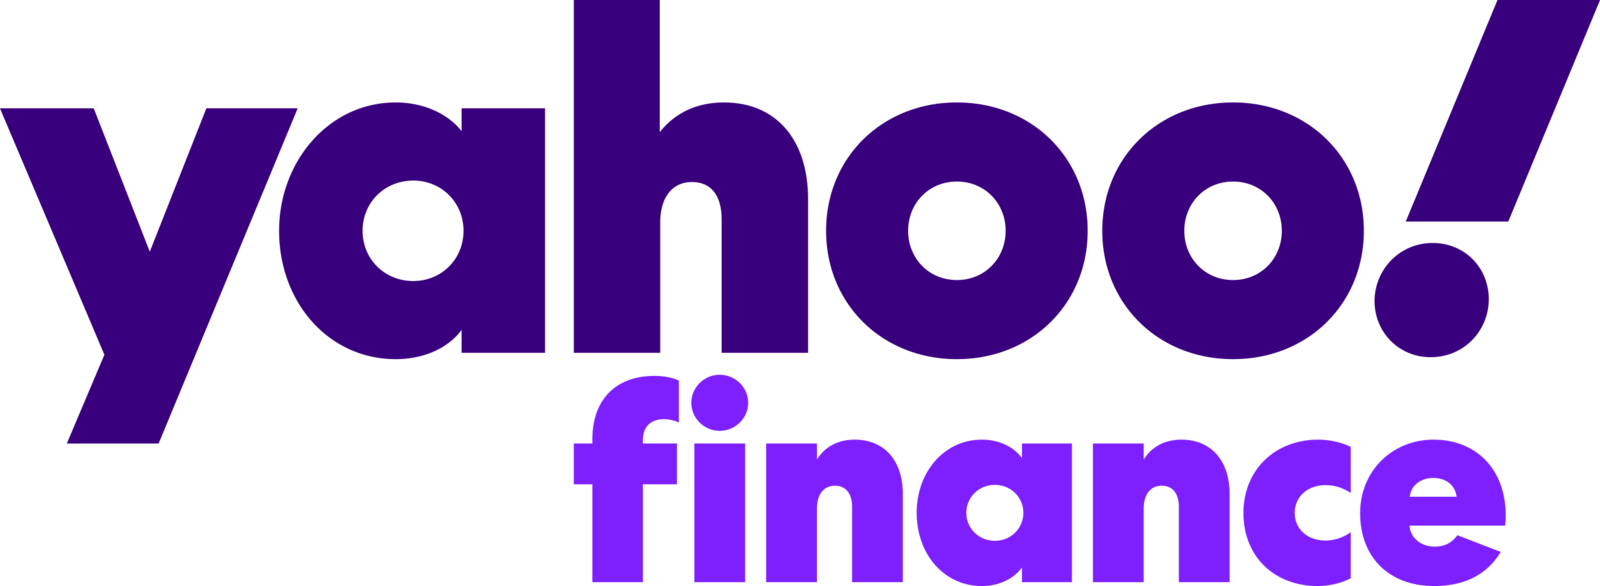 Bliv featured in Yahoo Finance